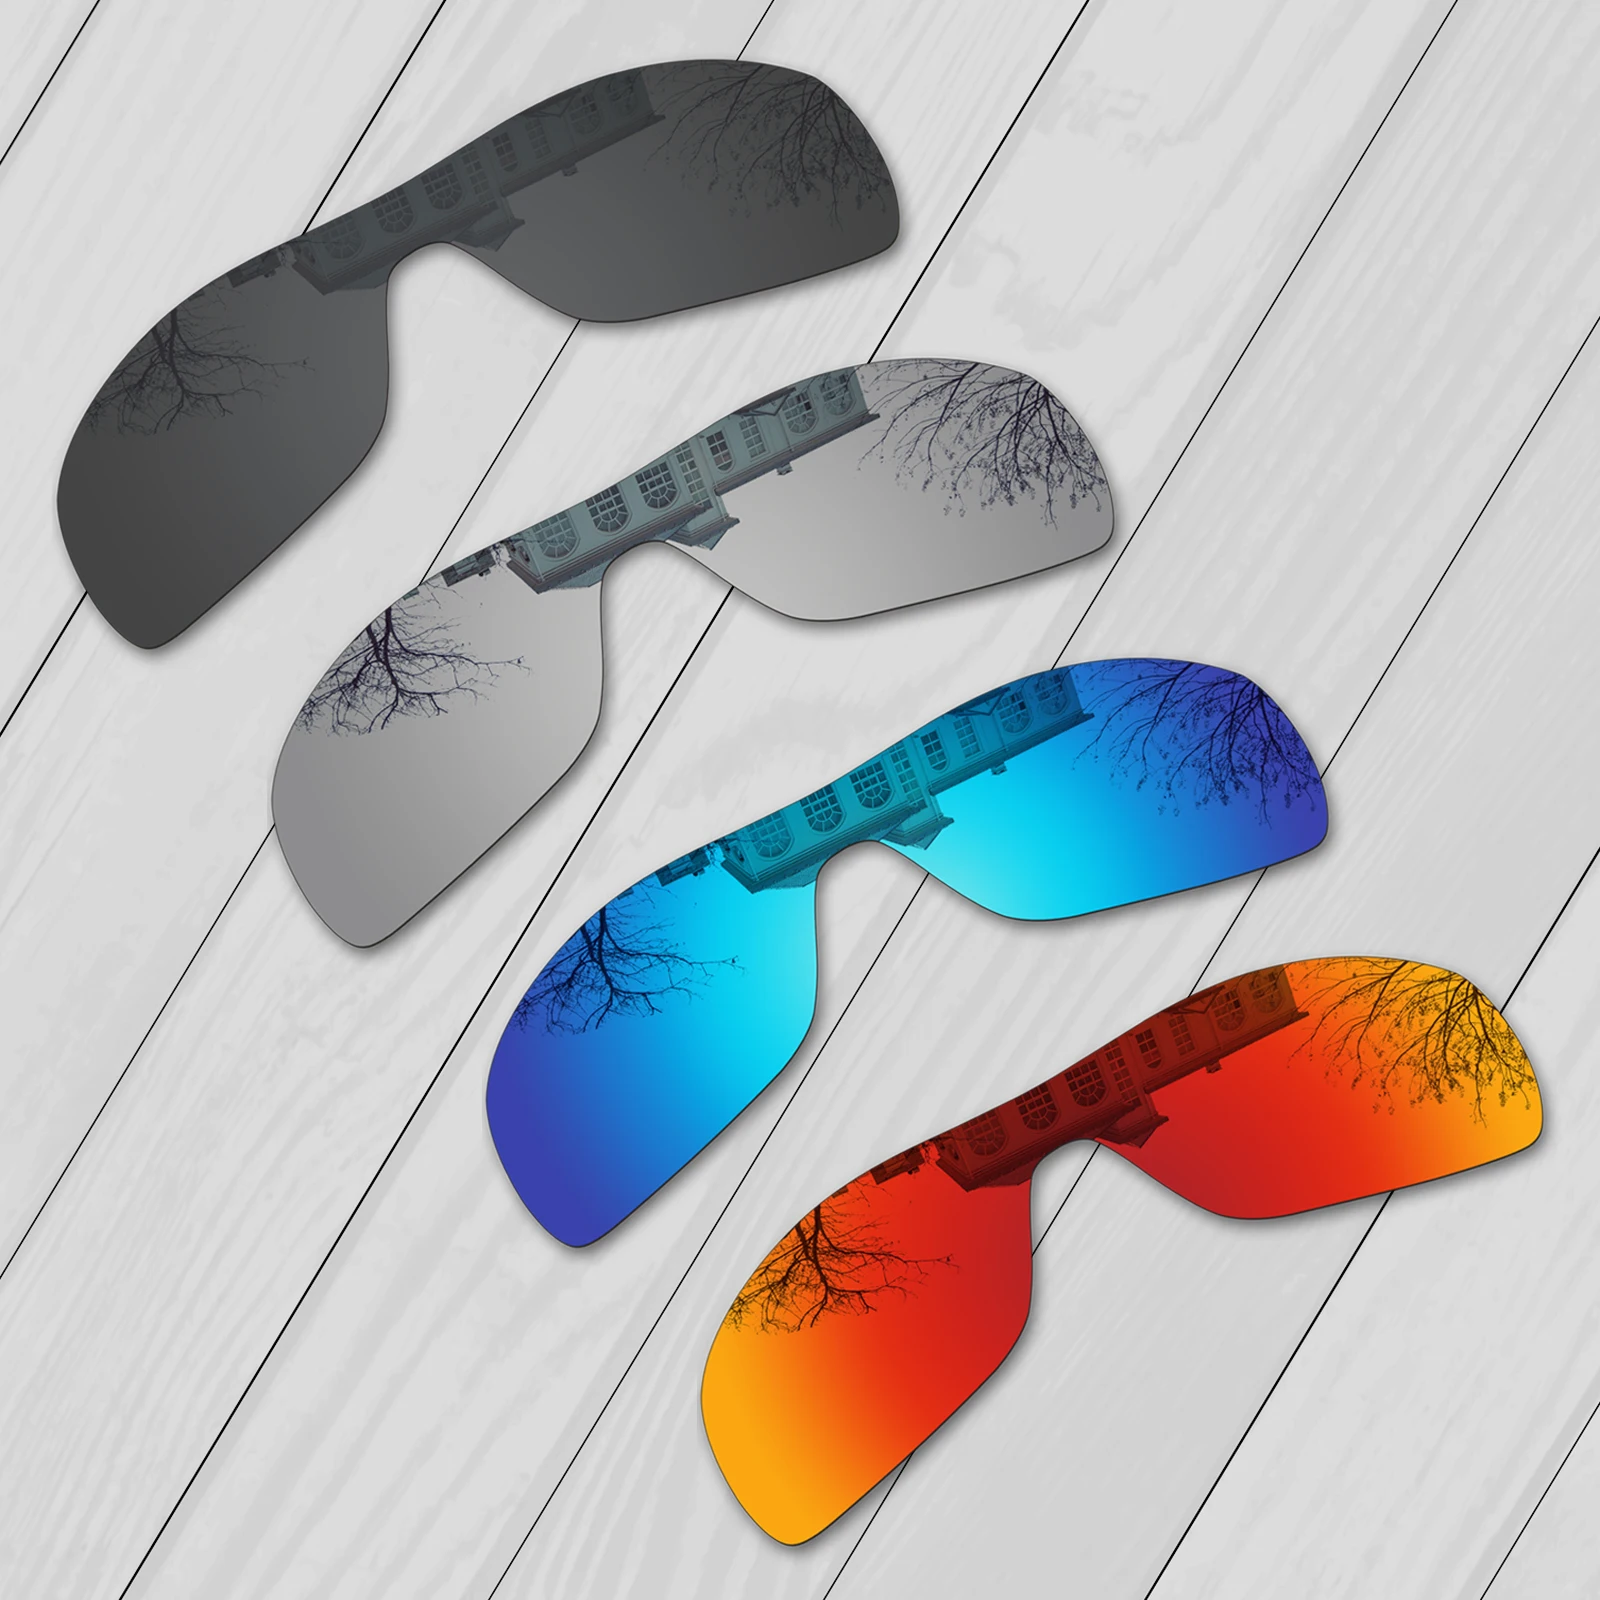 E.O.S 4 Pieces Black & Silver & Ice Blue & Fire Red Polarized Replacement Lenses for Oakley Turbine Rotor OO9307 Sunglasses